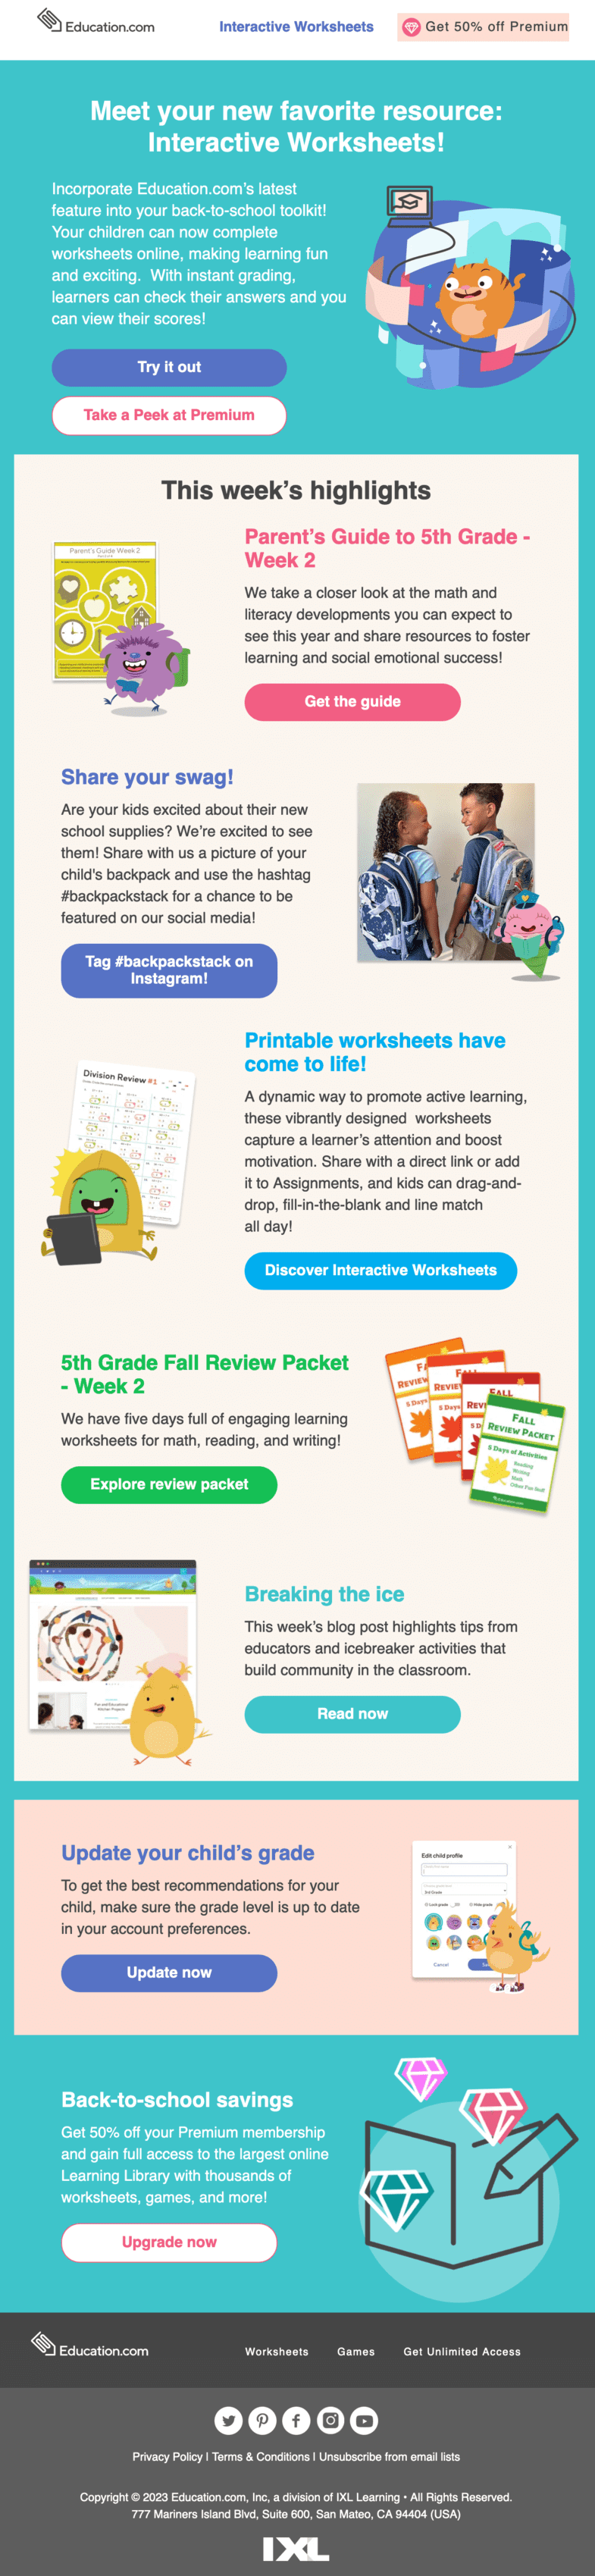 Back-to-school email with guides and worksheets for a parent of a 5th grader